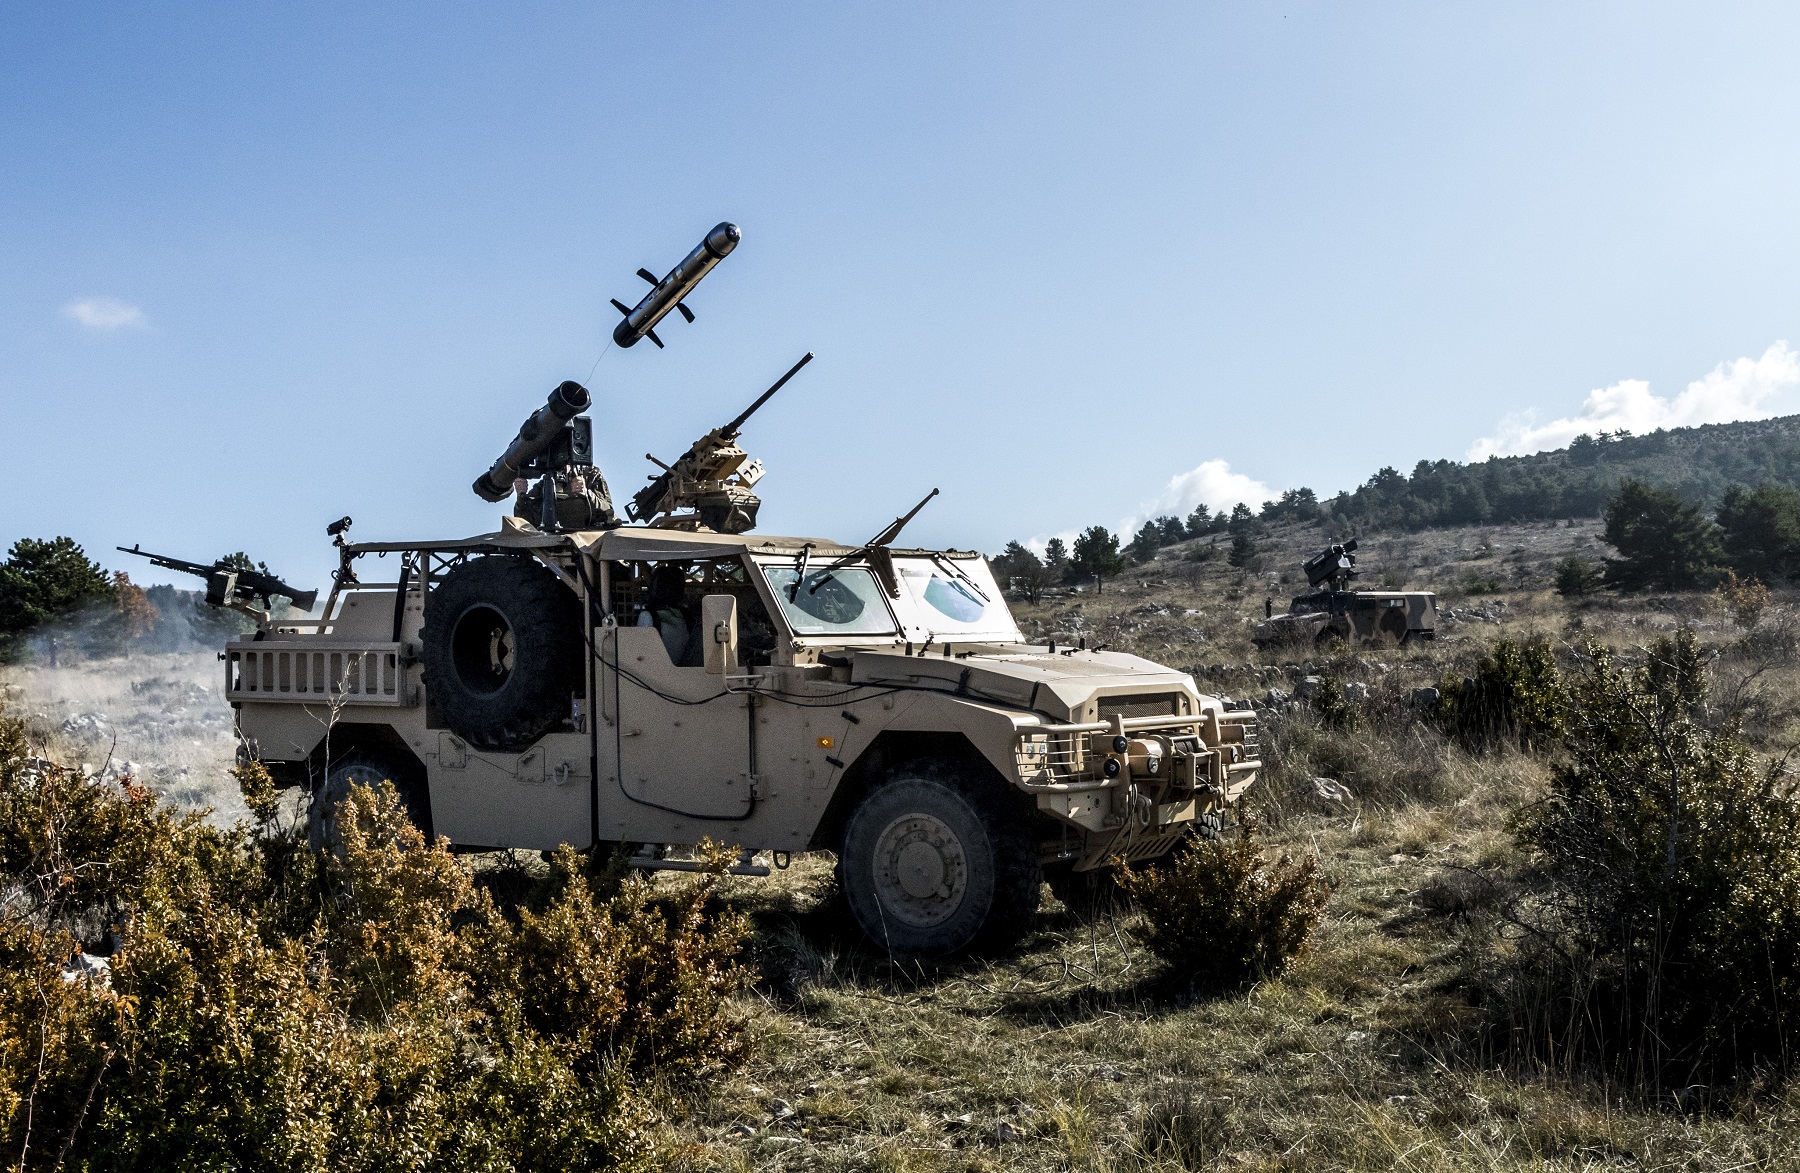 MBDA carrying out the first firing of an MMP missile from an ARQUUS Sabre special forces vehicle